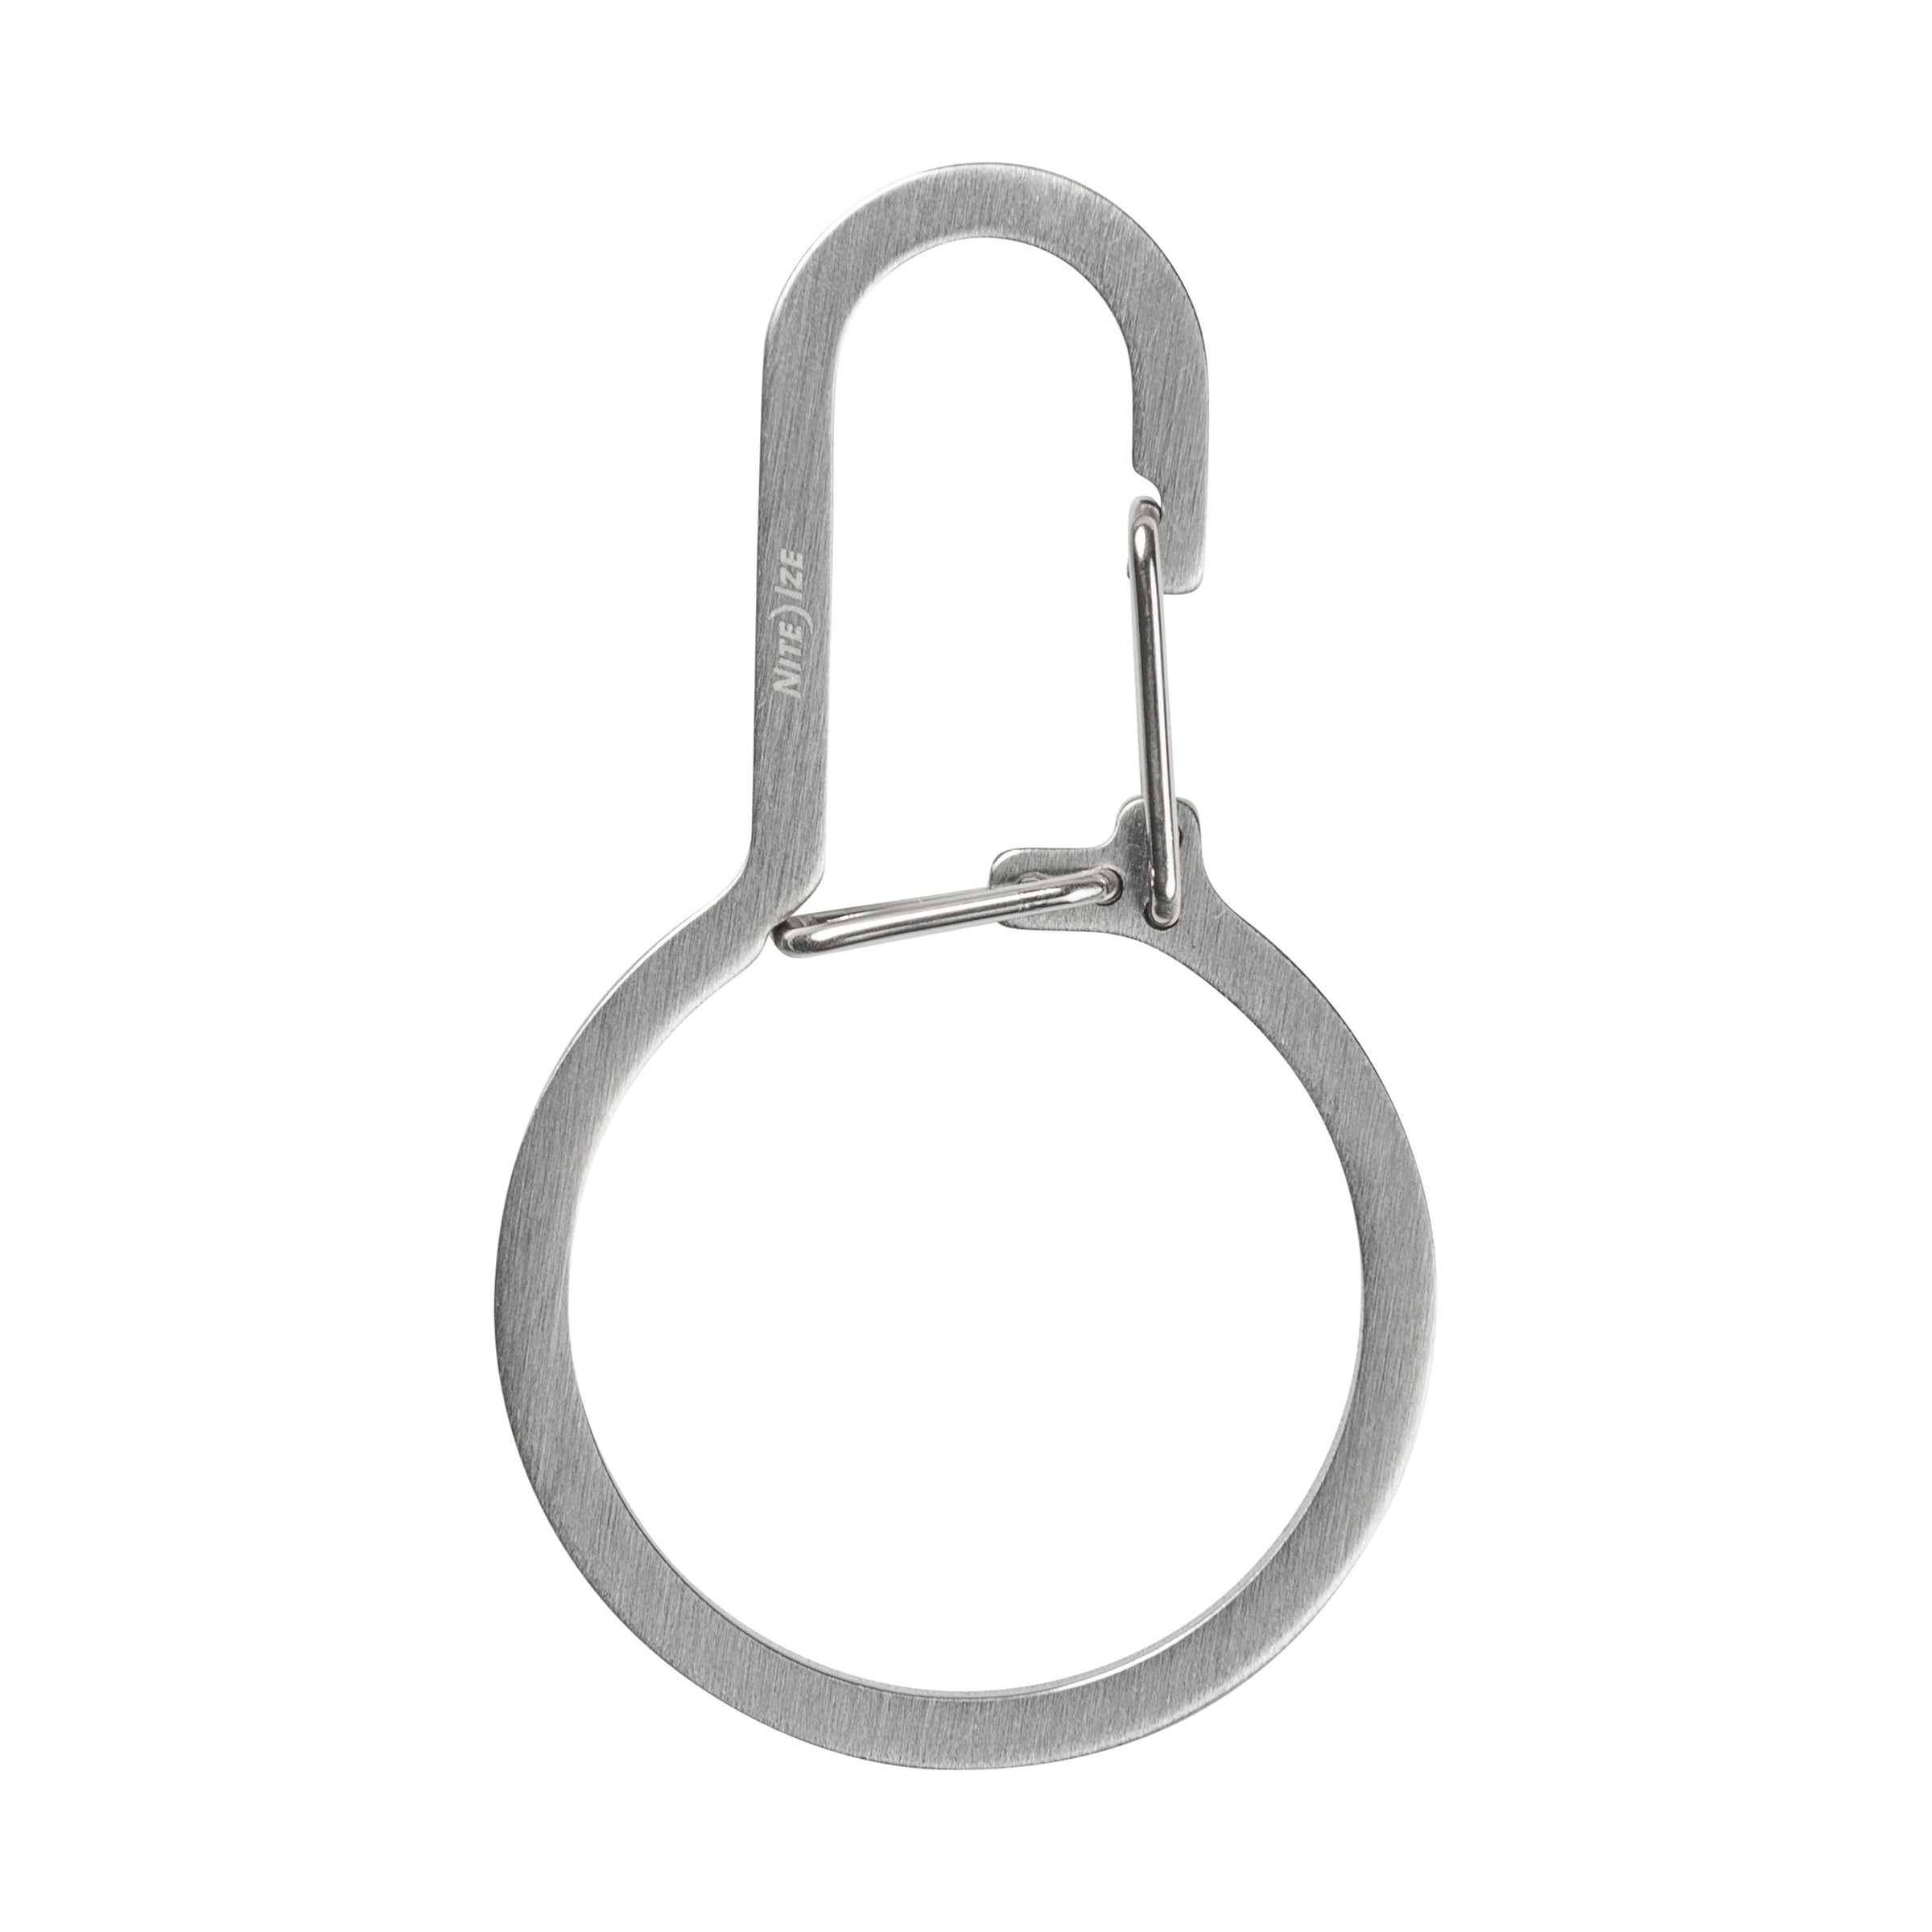 Nite Ize Stainless Steel No.3 G-Series Dual Chamber Carabiner Key Chain